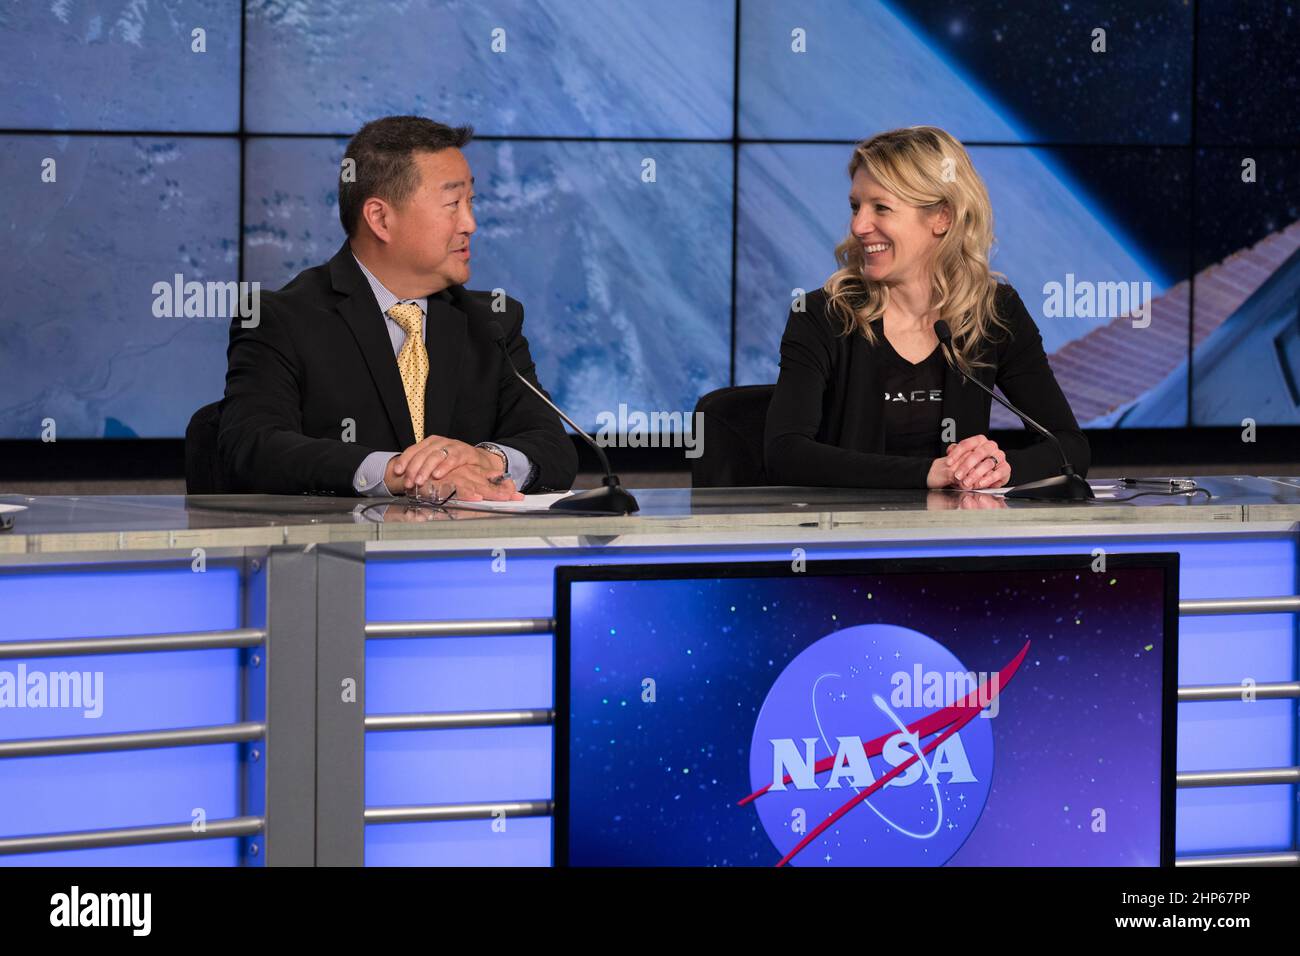 In the Press Site auditorium of NASA's Kennedy Space Center in Florida, from left, Ven Feng, manager of the Transportation Integration Office for the International Space Station Program, and Jessica Jensen, SpaceX director of Dragon Mission Management, speak to media at a post-launch news conference following the liftoff of SpaceX CRS-13. The flight is a commercial resupply services mission to the International Space Station. SpaceX CRS-13 lifted off atop a Falcon 9 rocket from Space Launch Complex 40 at Cape Canaveral Air Force Station at 10:36 a.m. EST with supplies and equipment and new sci Stock Photo